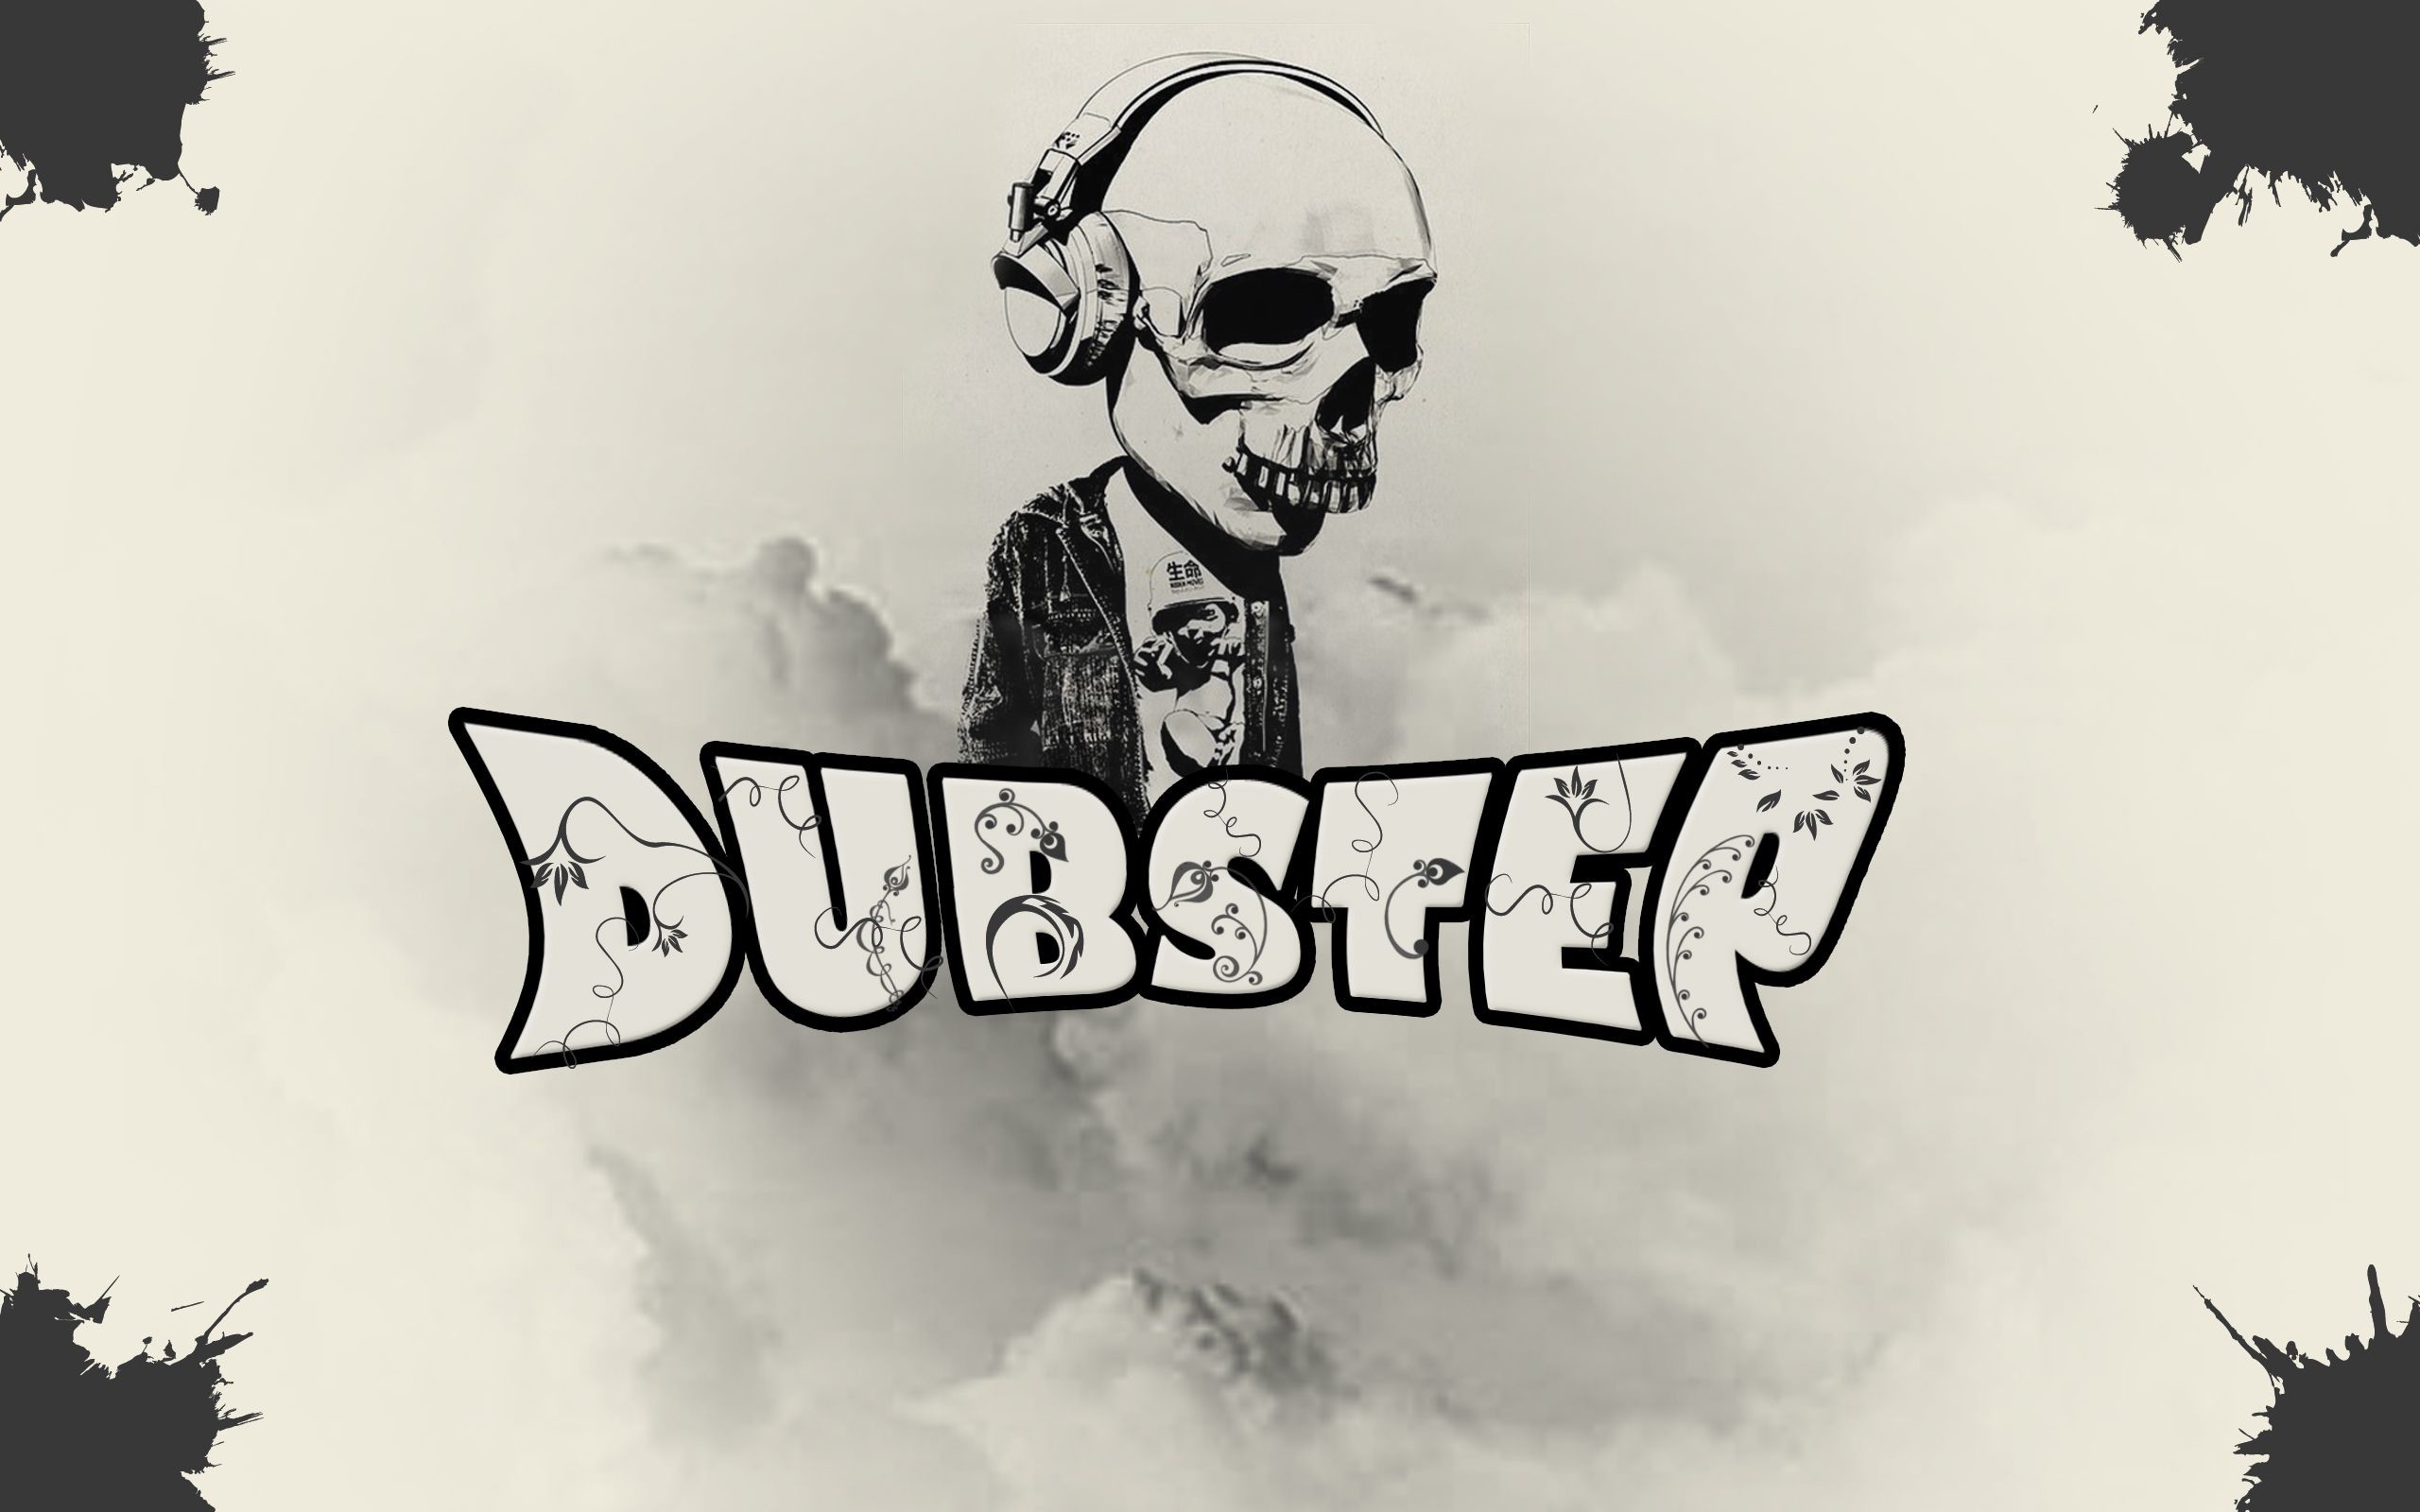 2560x1600 Widescreen Wallpapers of Dubstep, Awesome Photo